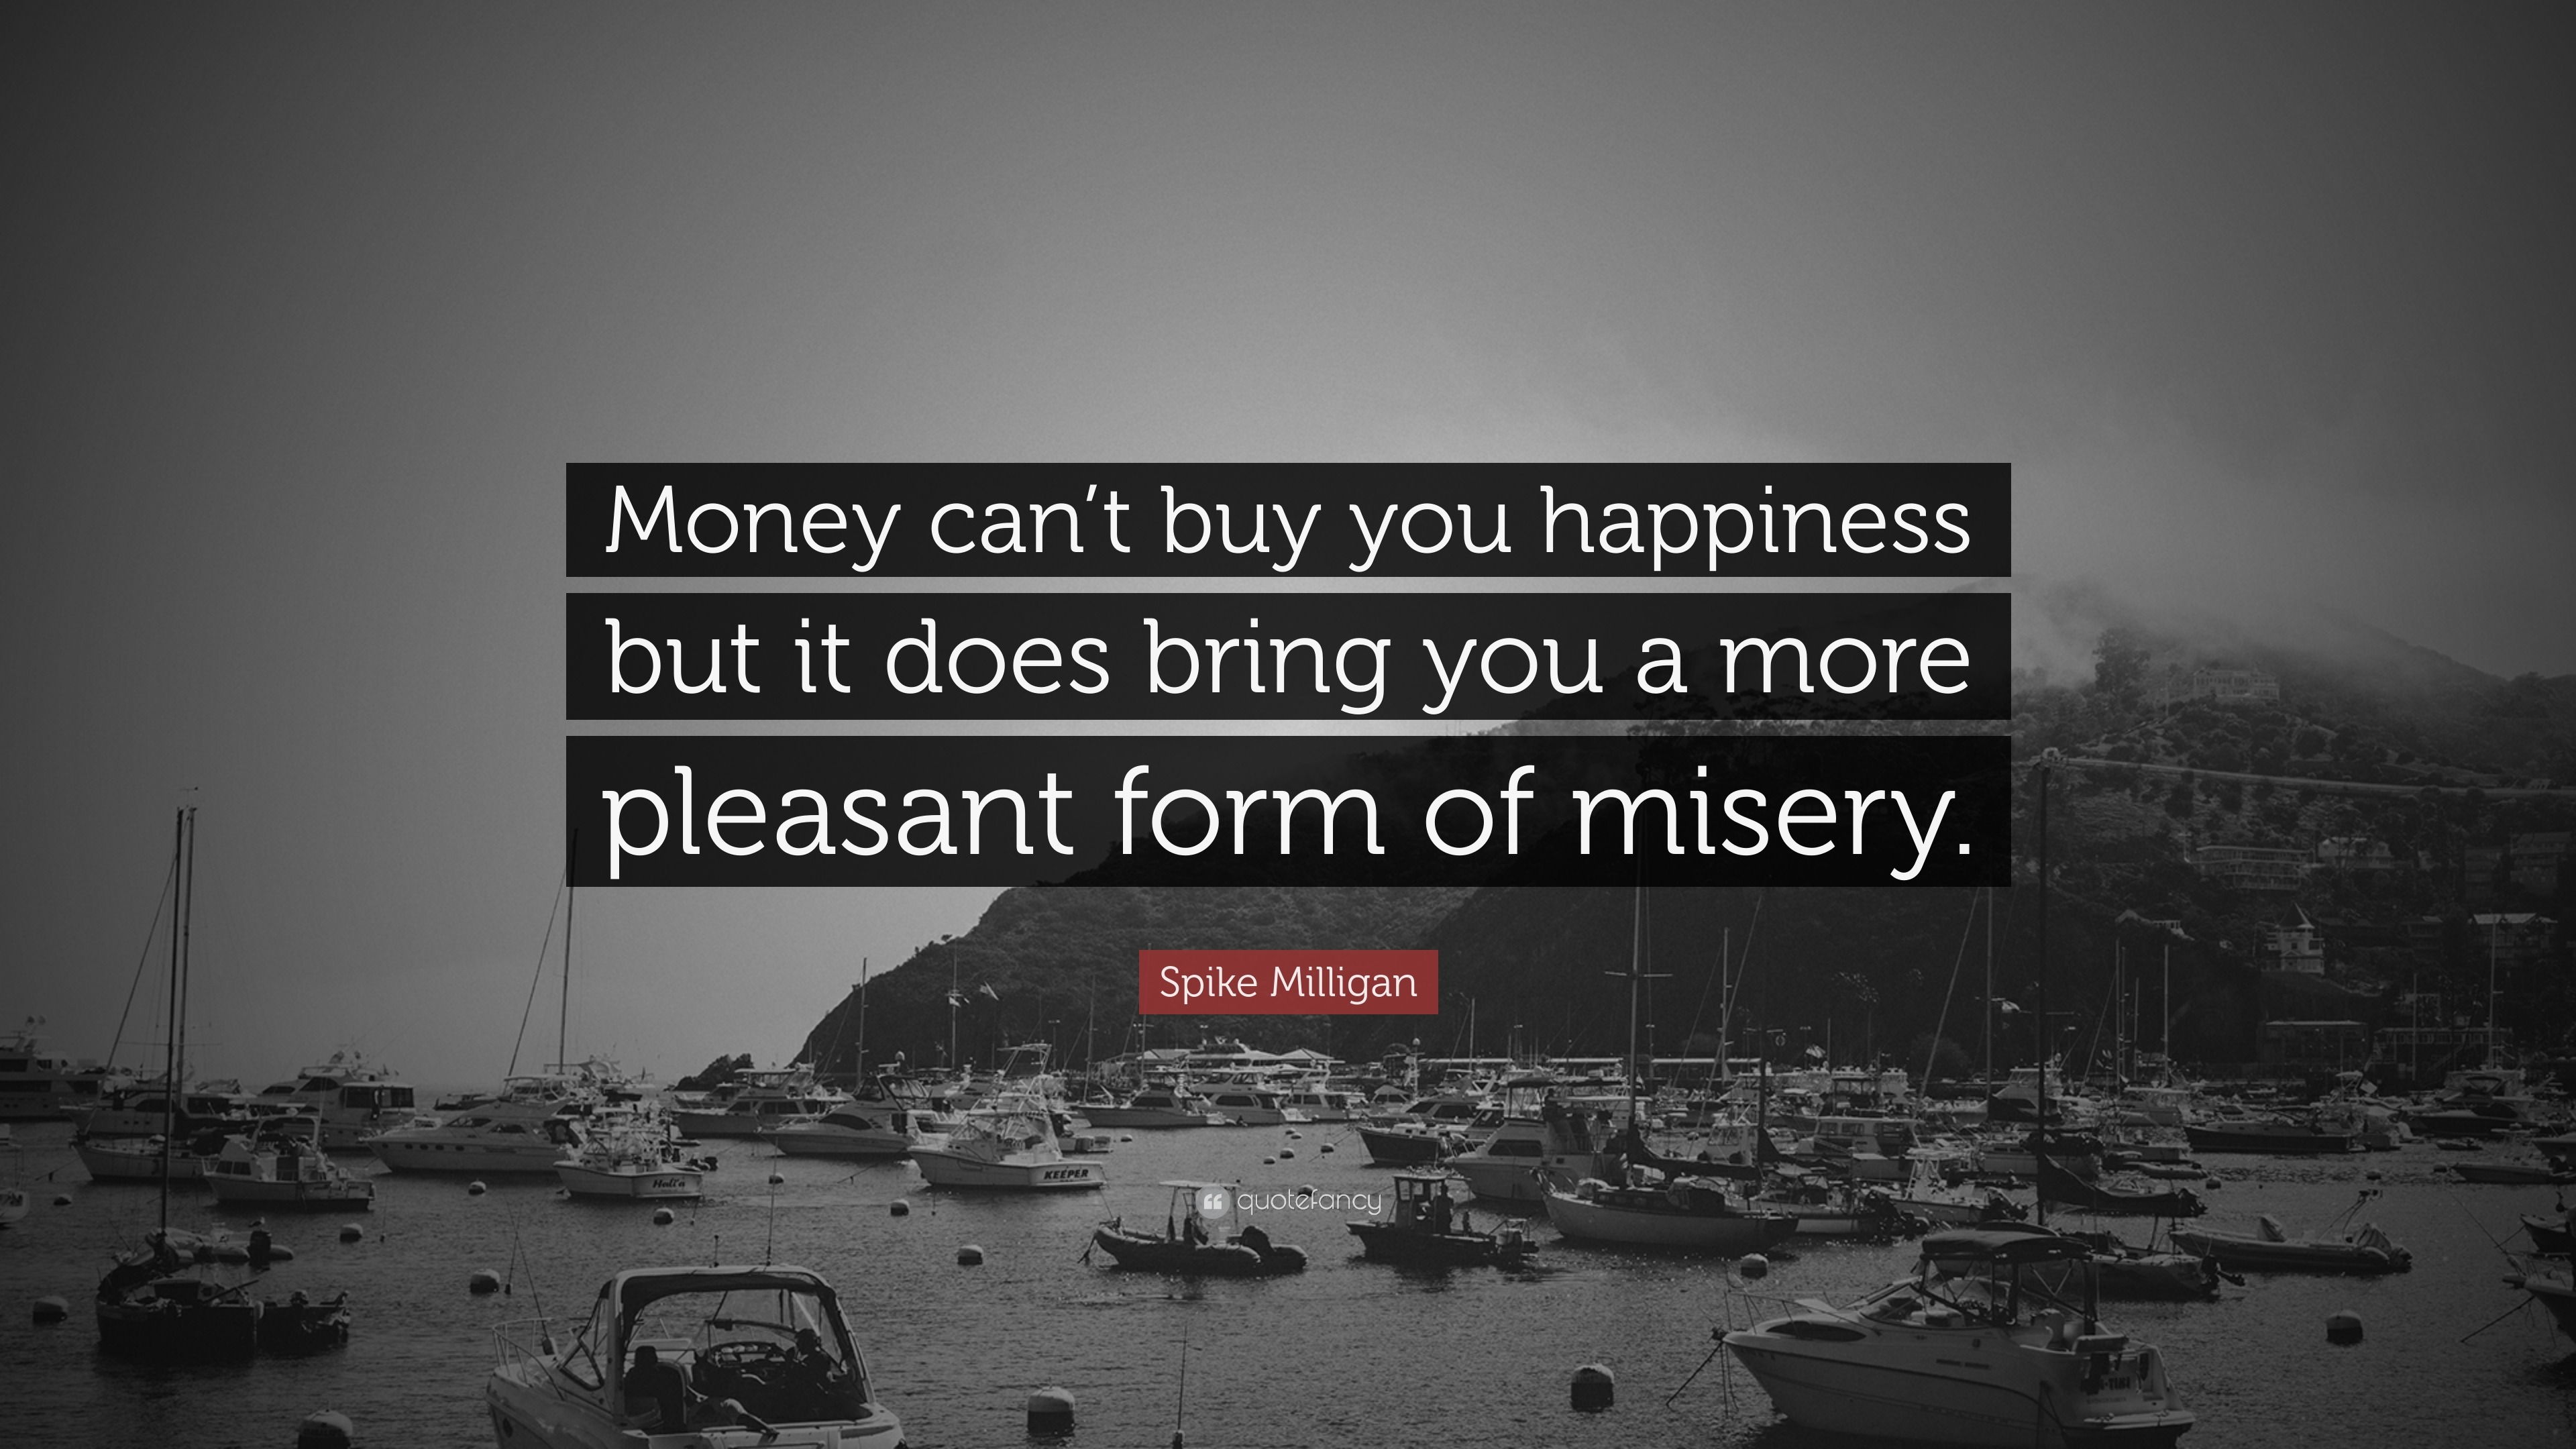 Spike Milligan Quote: “Money can’t buy you happiness but it does bring